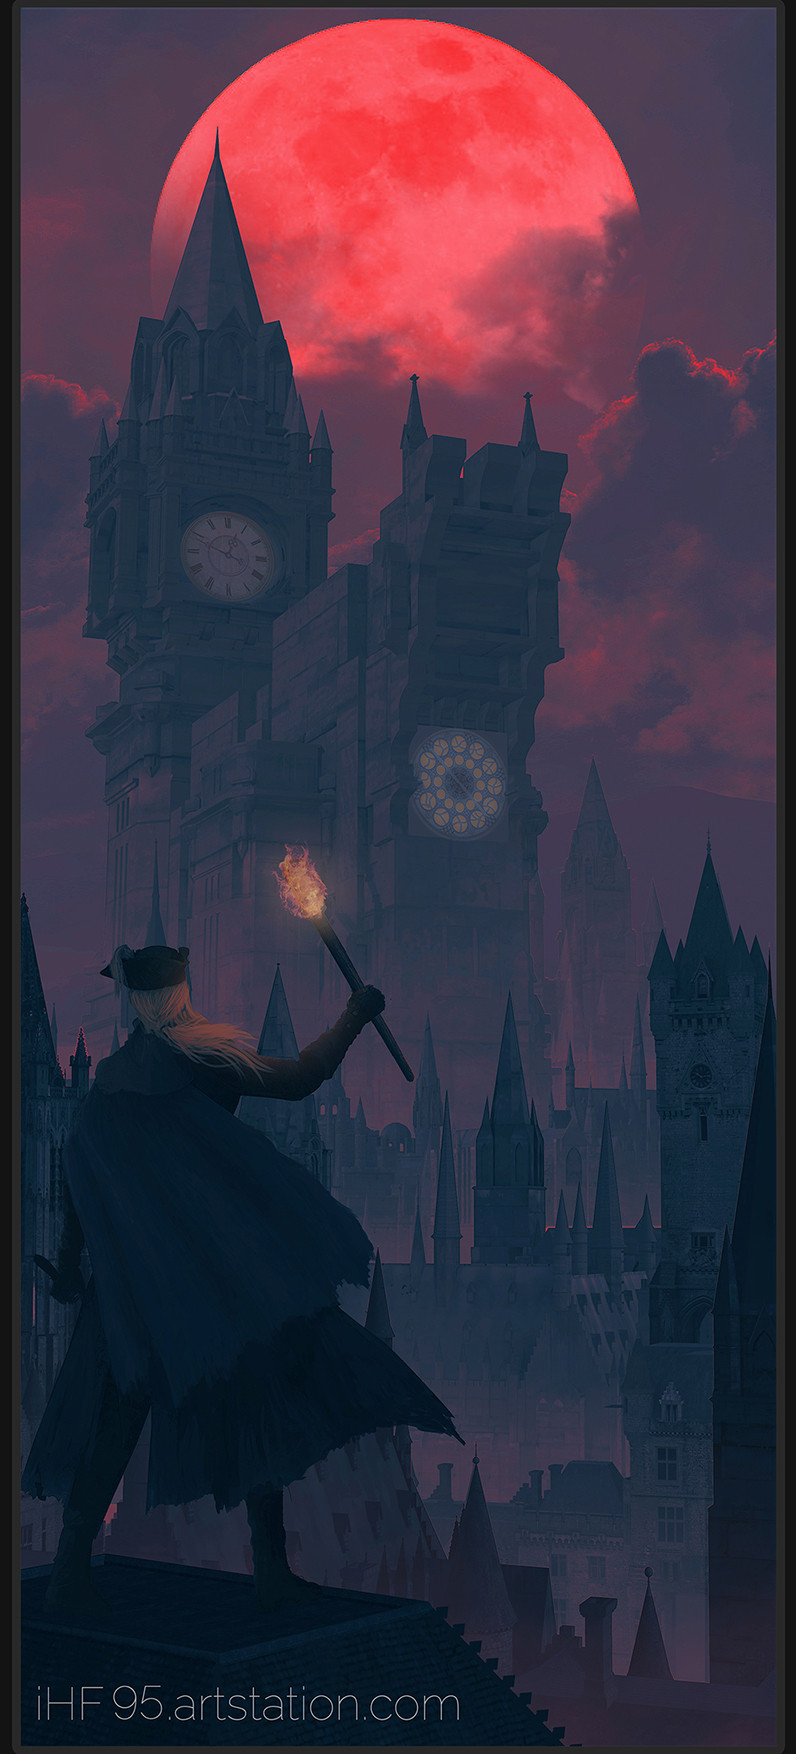 1girl @_(symbol) architecture artist_name artstation_username bloodborne boots cape clock clock_tower clouds cloudy_sky coat flying_buttress full_moon gloves gothic gothic_architecture hat hat_feather highres holding holding_sword holding_torch holding_weapon ihf95 lady_maria_of_the_astral_clocktower long_hair moon ponytail rakuyo_(bloodborne) scenery sky solo sword torch tower tricorne weapon web_address white_hair yharnam